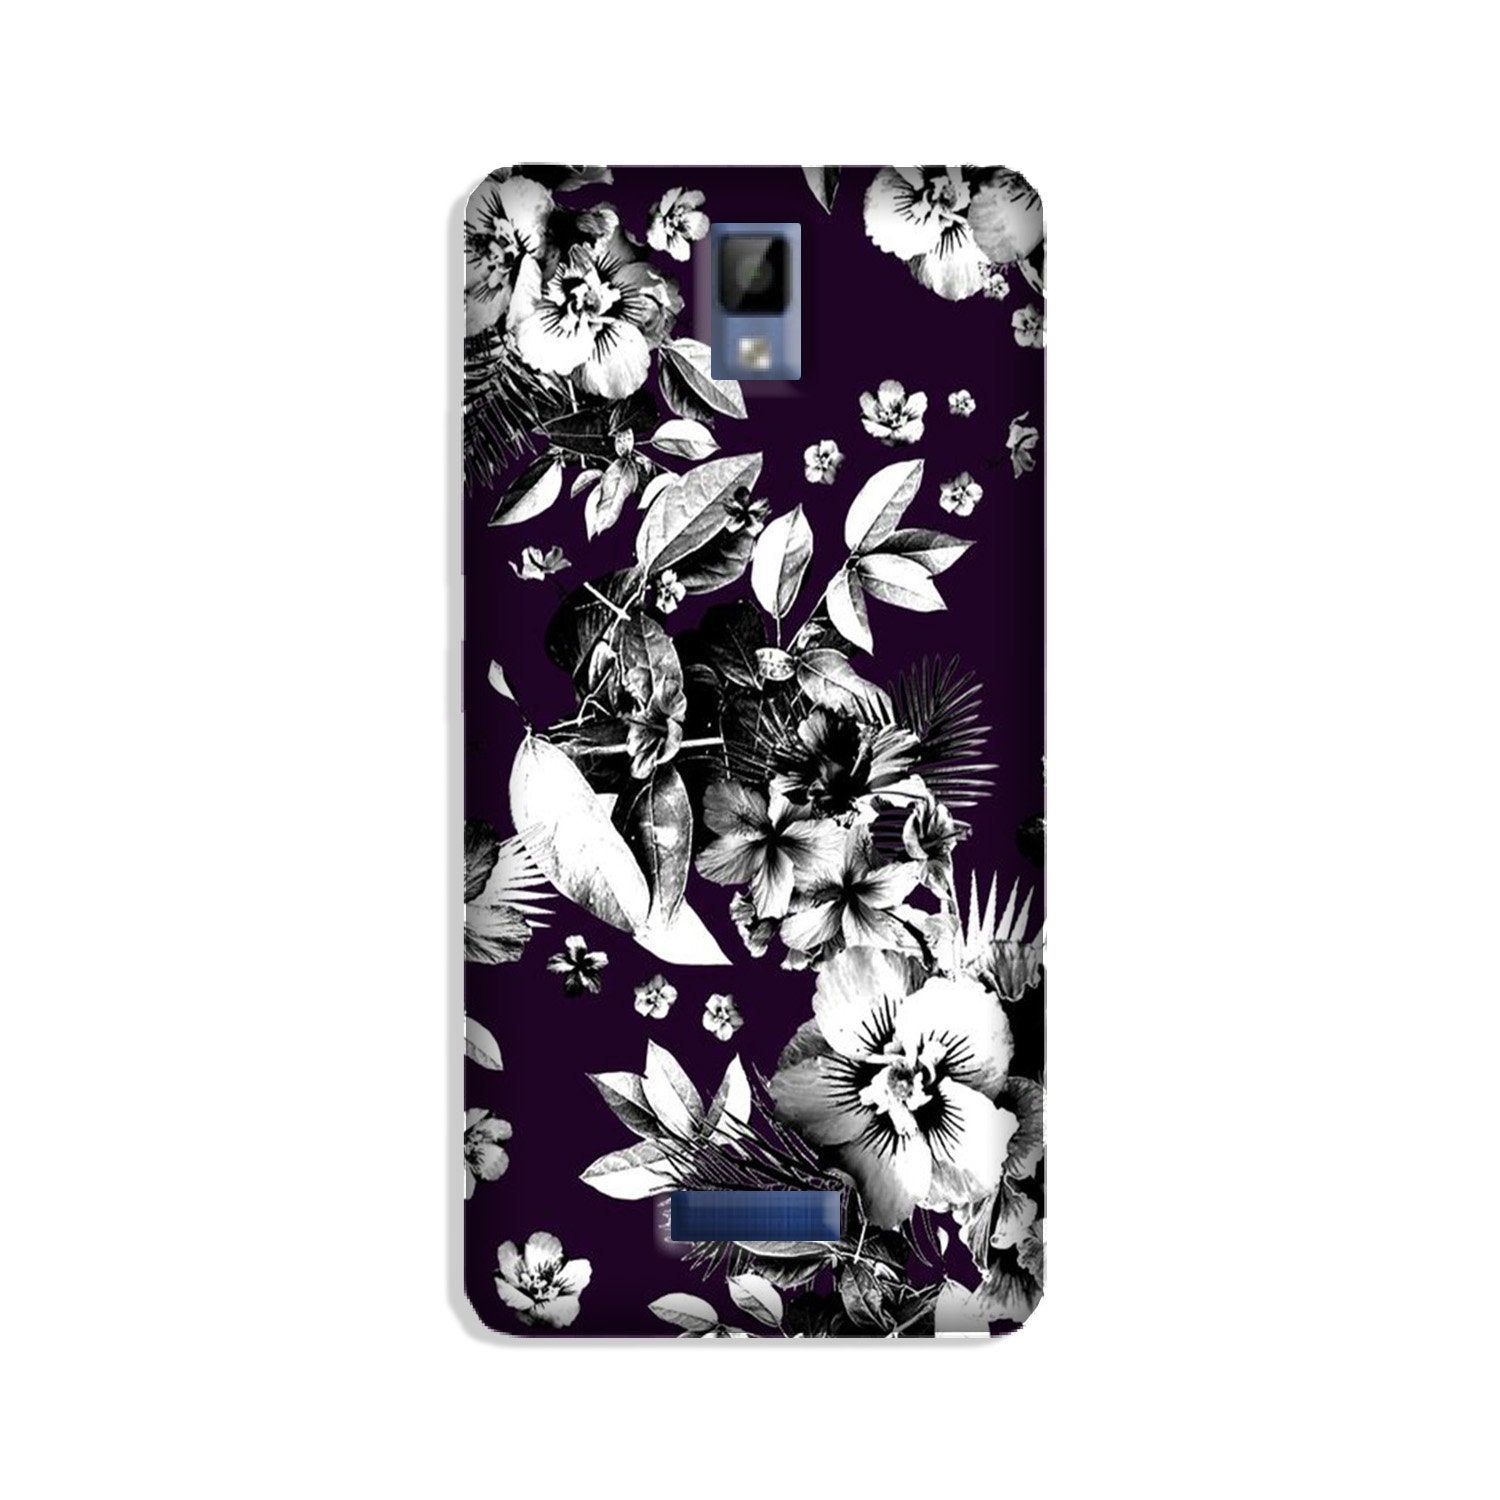 white flowers Case for Gionee P7